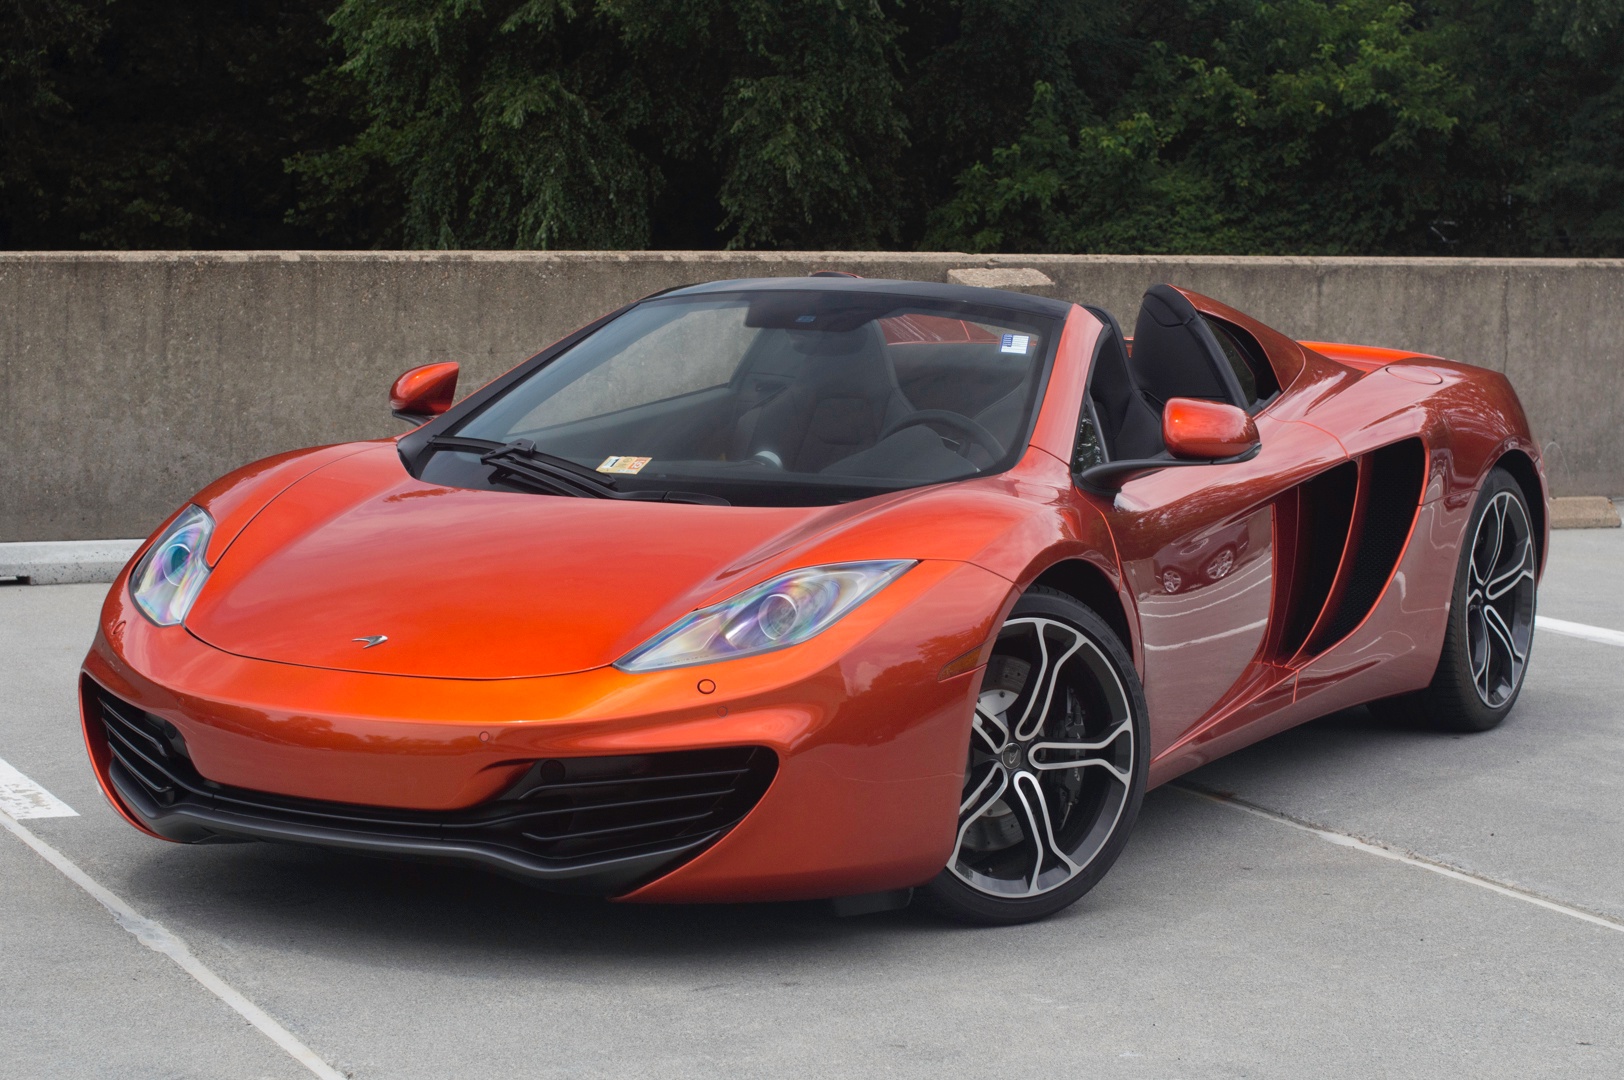 Our list of exotic cars includes the McLaren MP4-12C